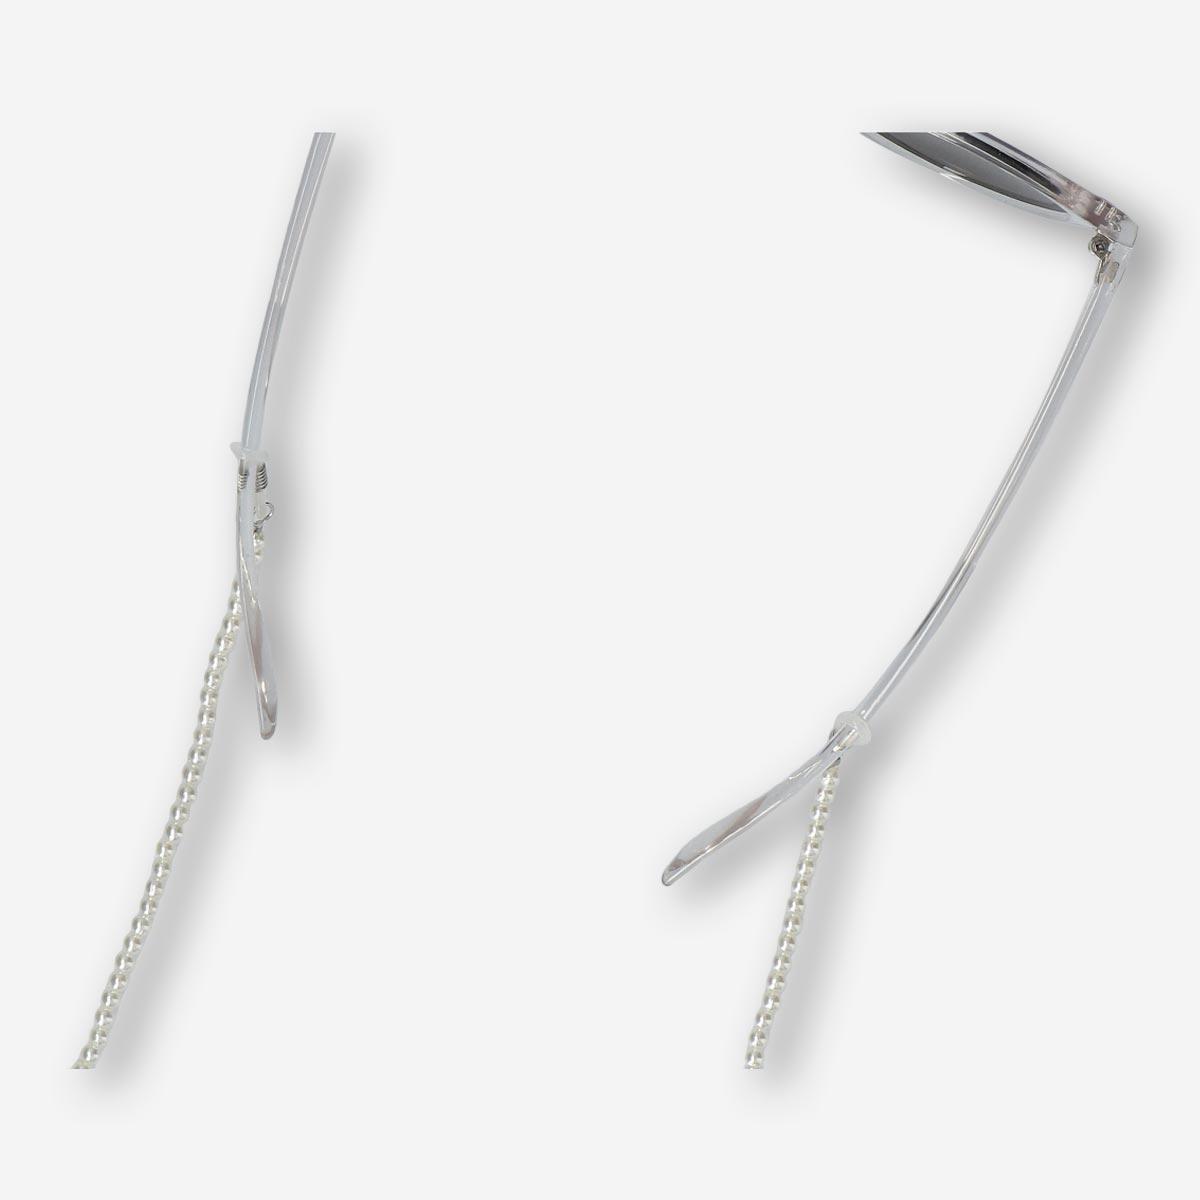 Silver spectacle strap